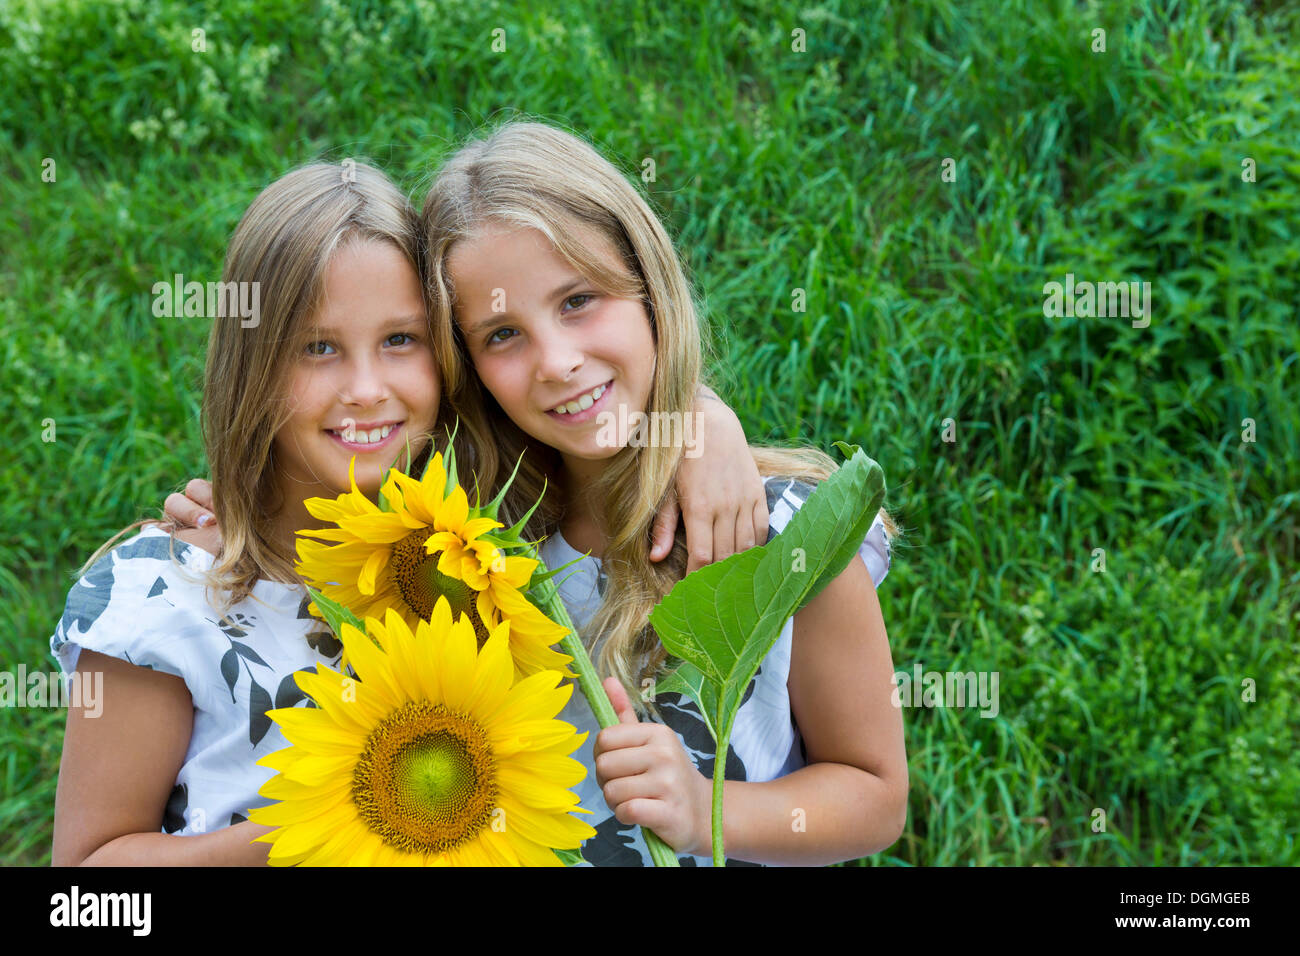 Twin girls, 9, with sunflowers Stock Photo